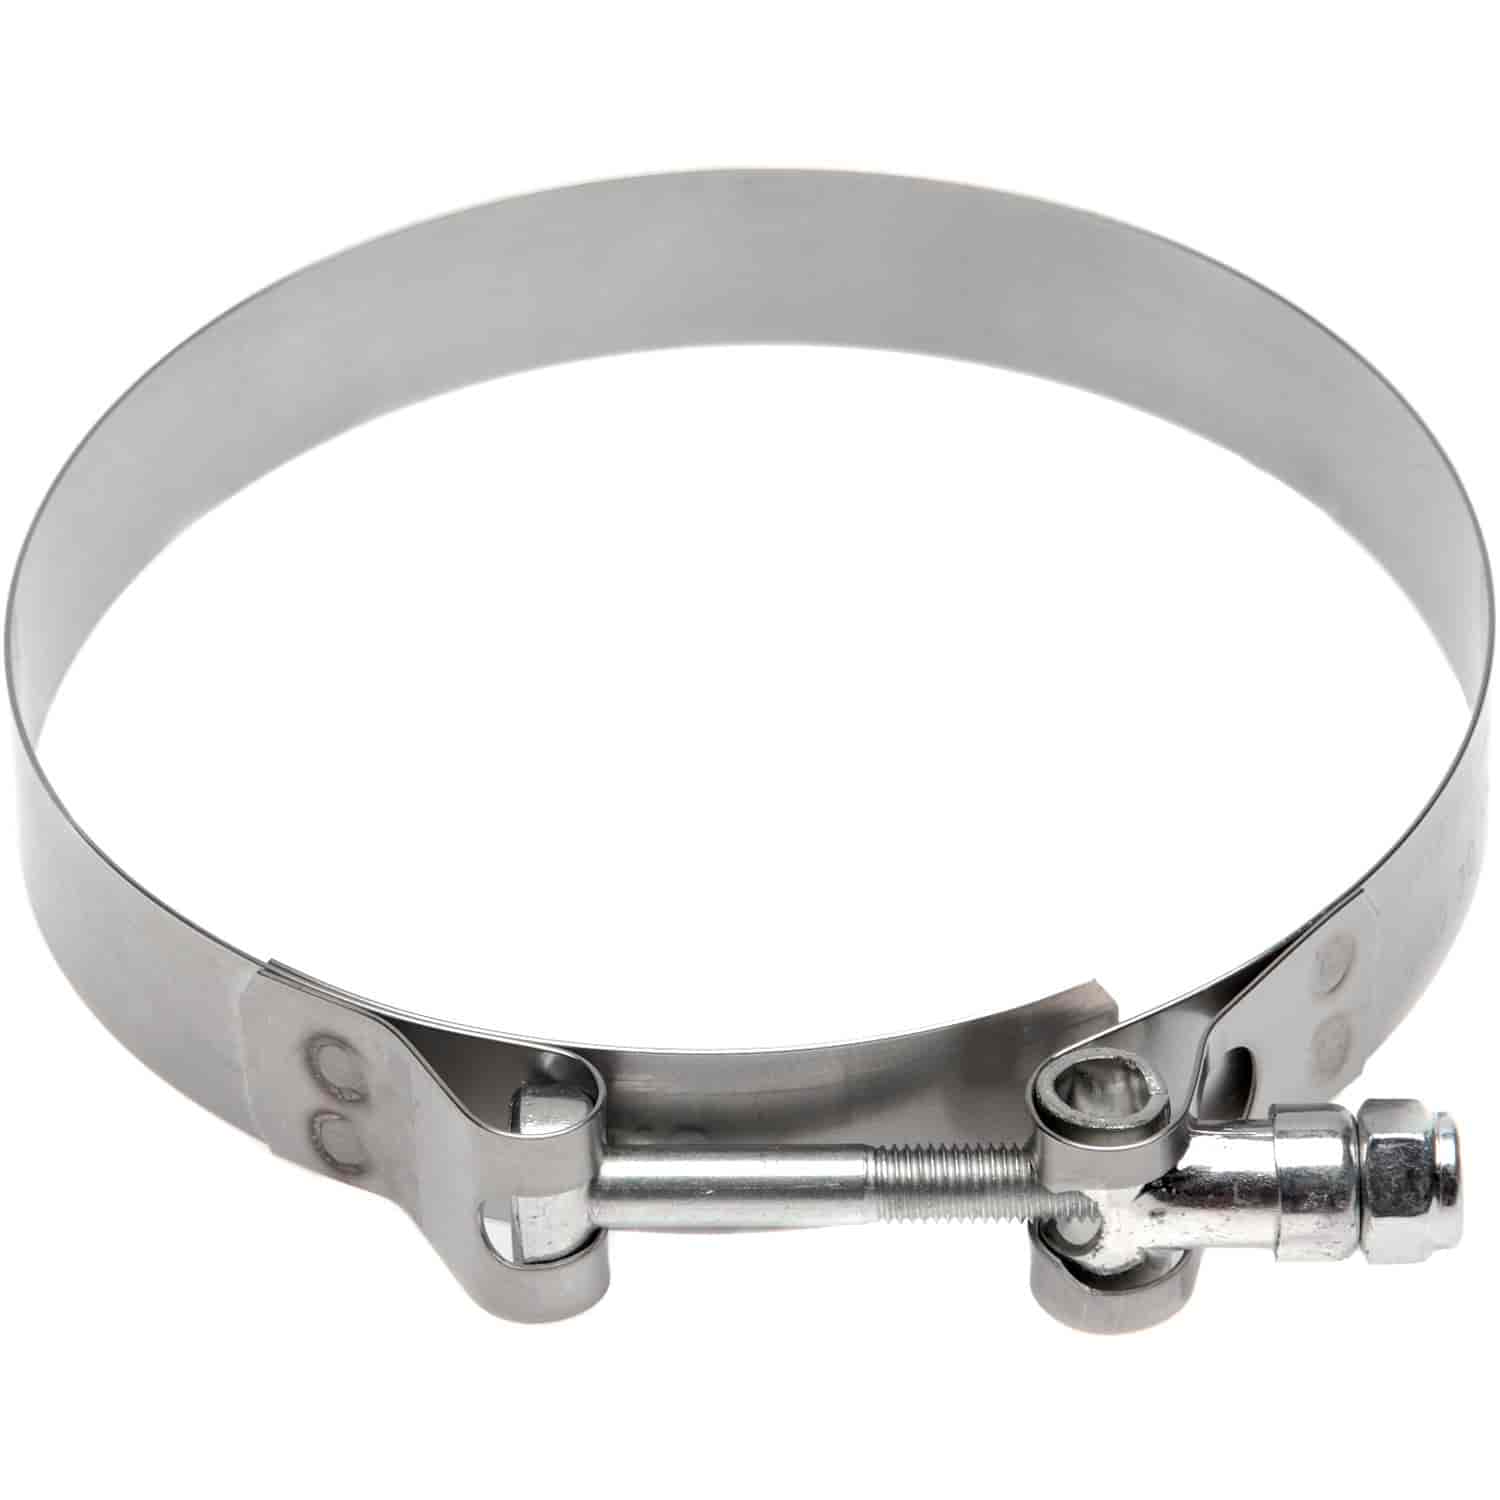 T-Bolt Hose Clamp [5.523 in. to 5.250 in.